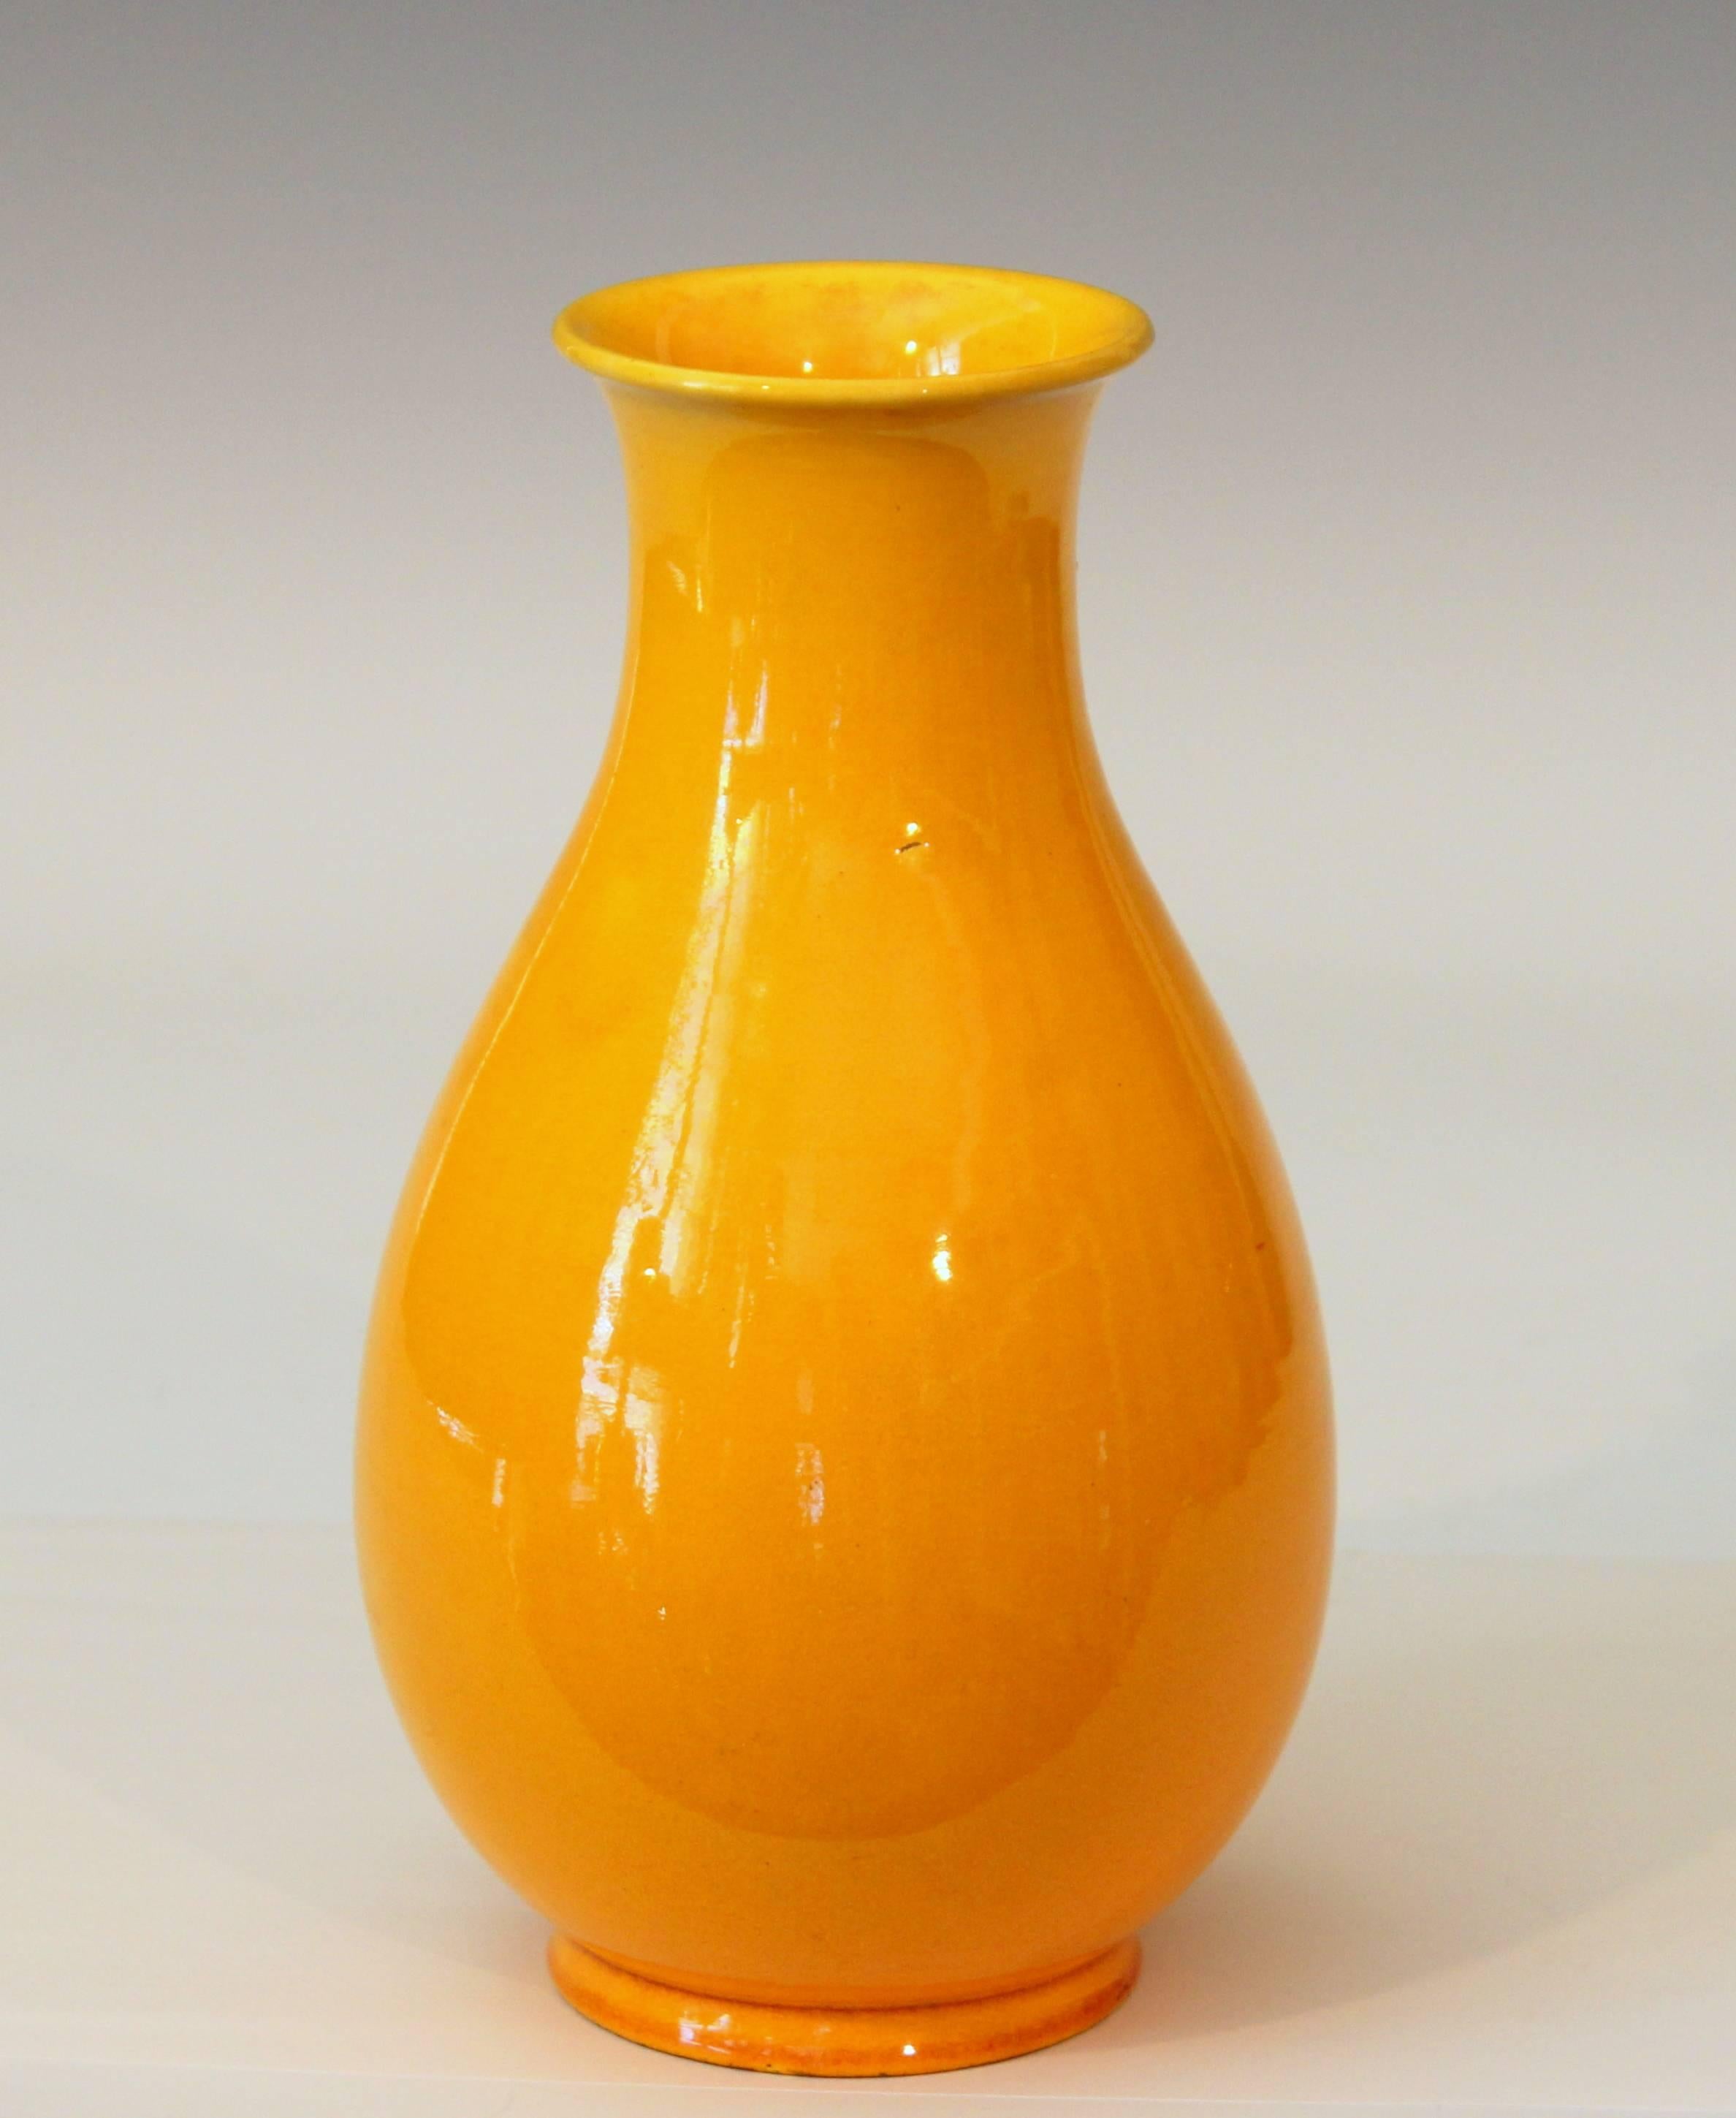 Nearly antique Awaji pottery vase in Yuhuchunping form with golden yellow monochrome glaze, circa 1930. Impressed export mark. Measure: 8 12